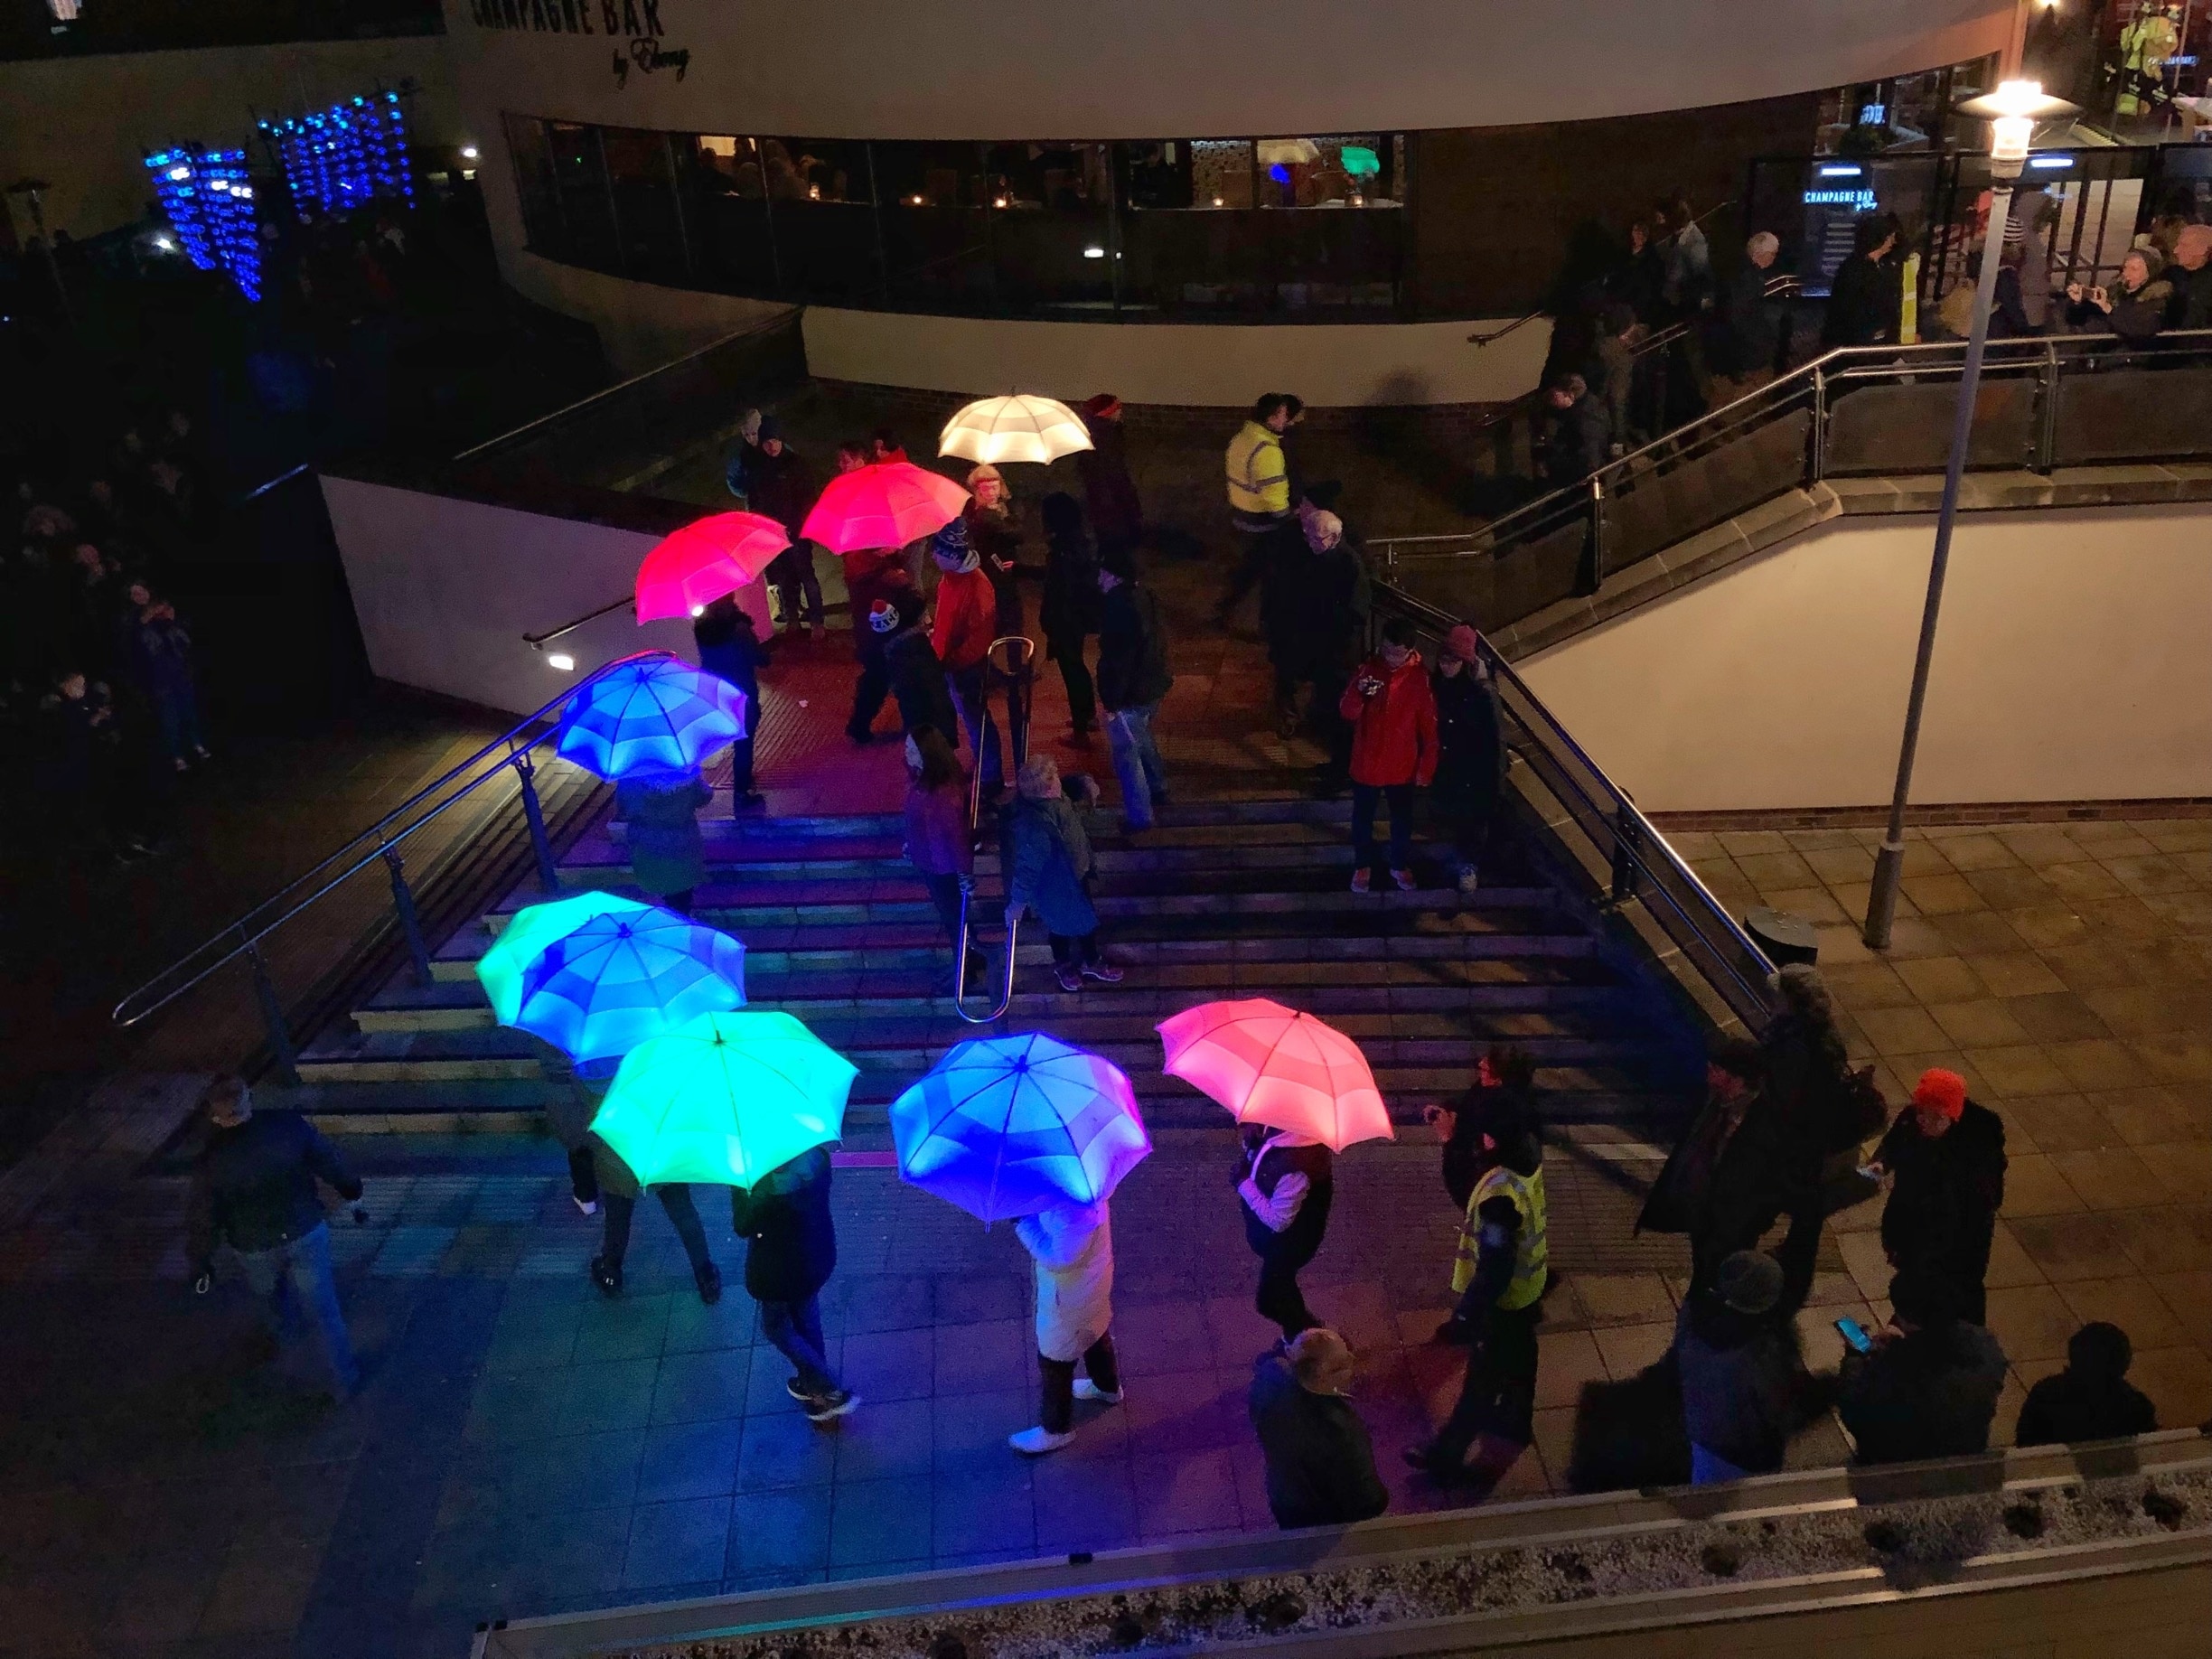 Durham Lumiere is a fantastic event that takes place every two years. This is a light installation of coloured umbrellas at the Gala Theatre. Free entry to Lumiere after 7:30! 